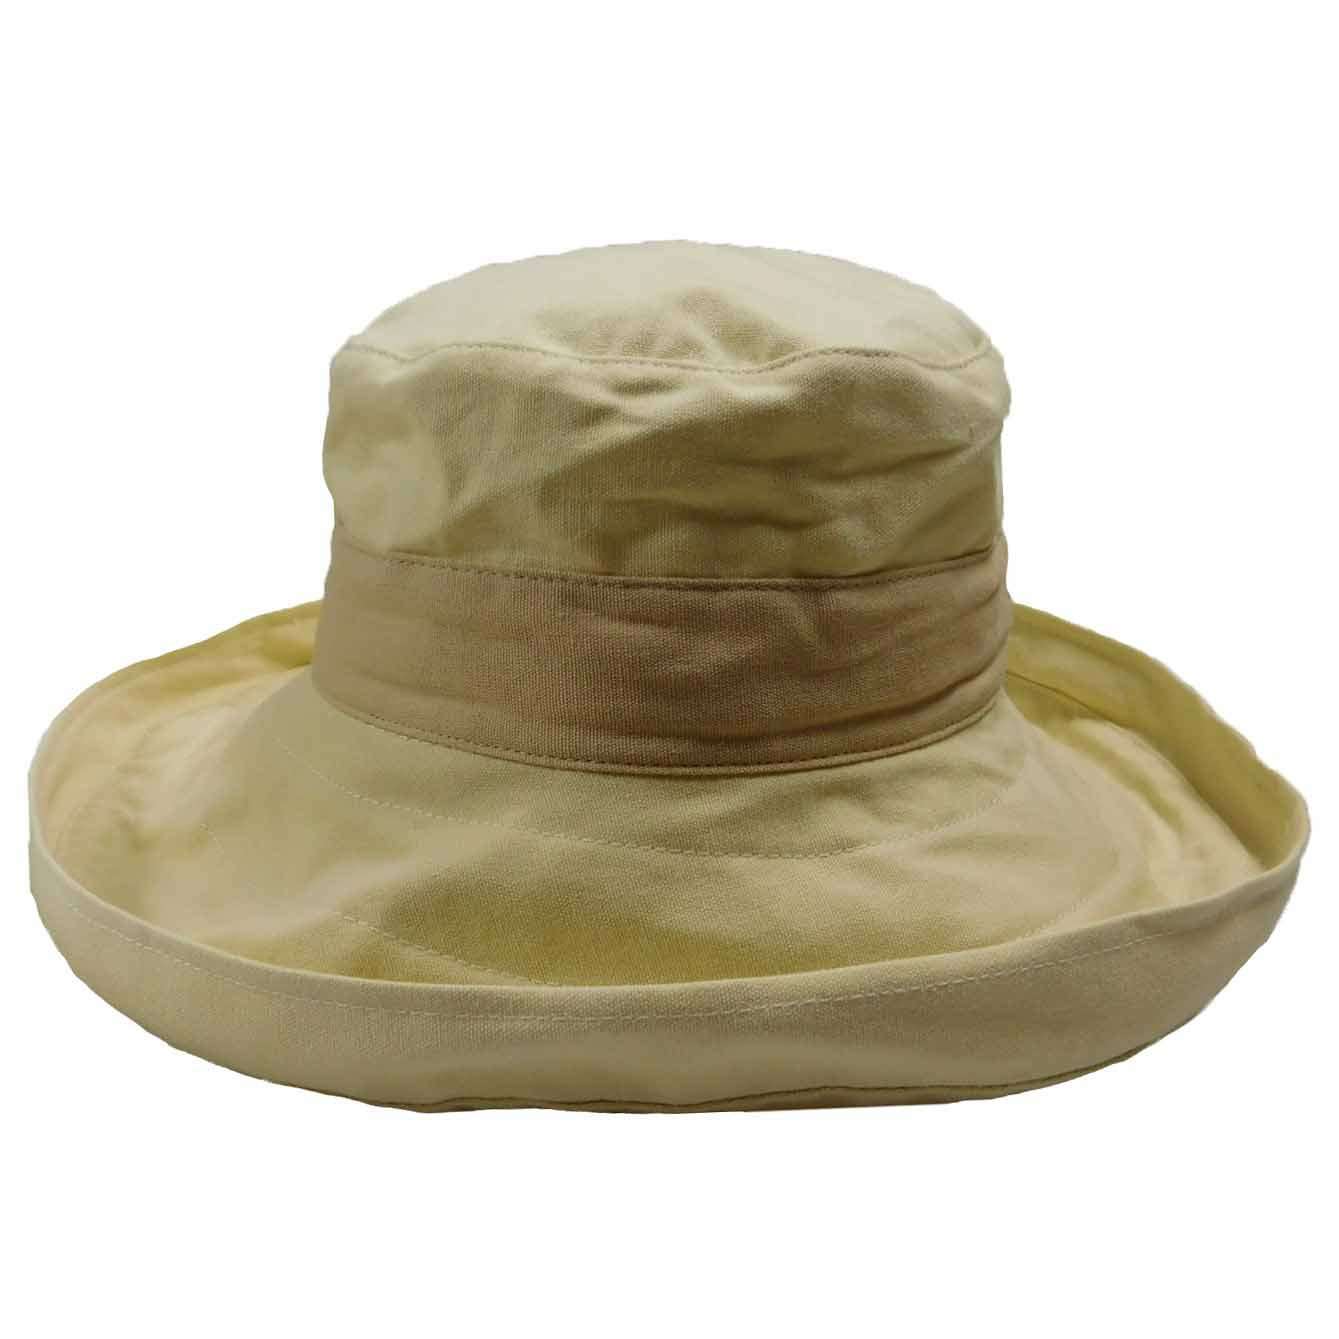 Cotton Breton Hat with Contrast Band Kettle Brim Hat Jeanne Simmons WSjs6648CR Cream  